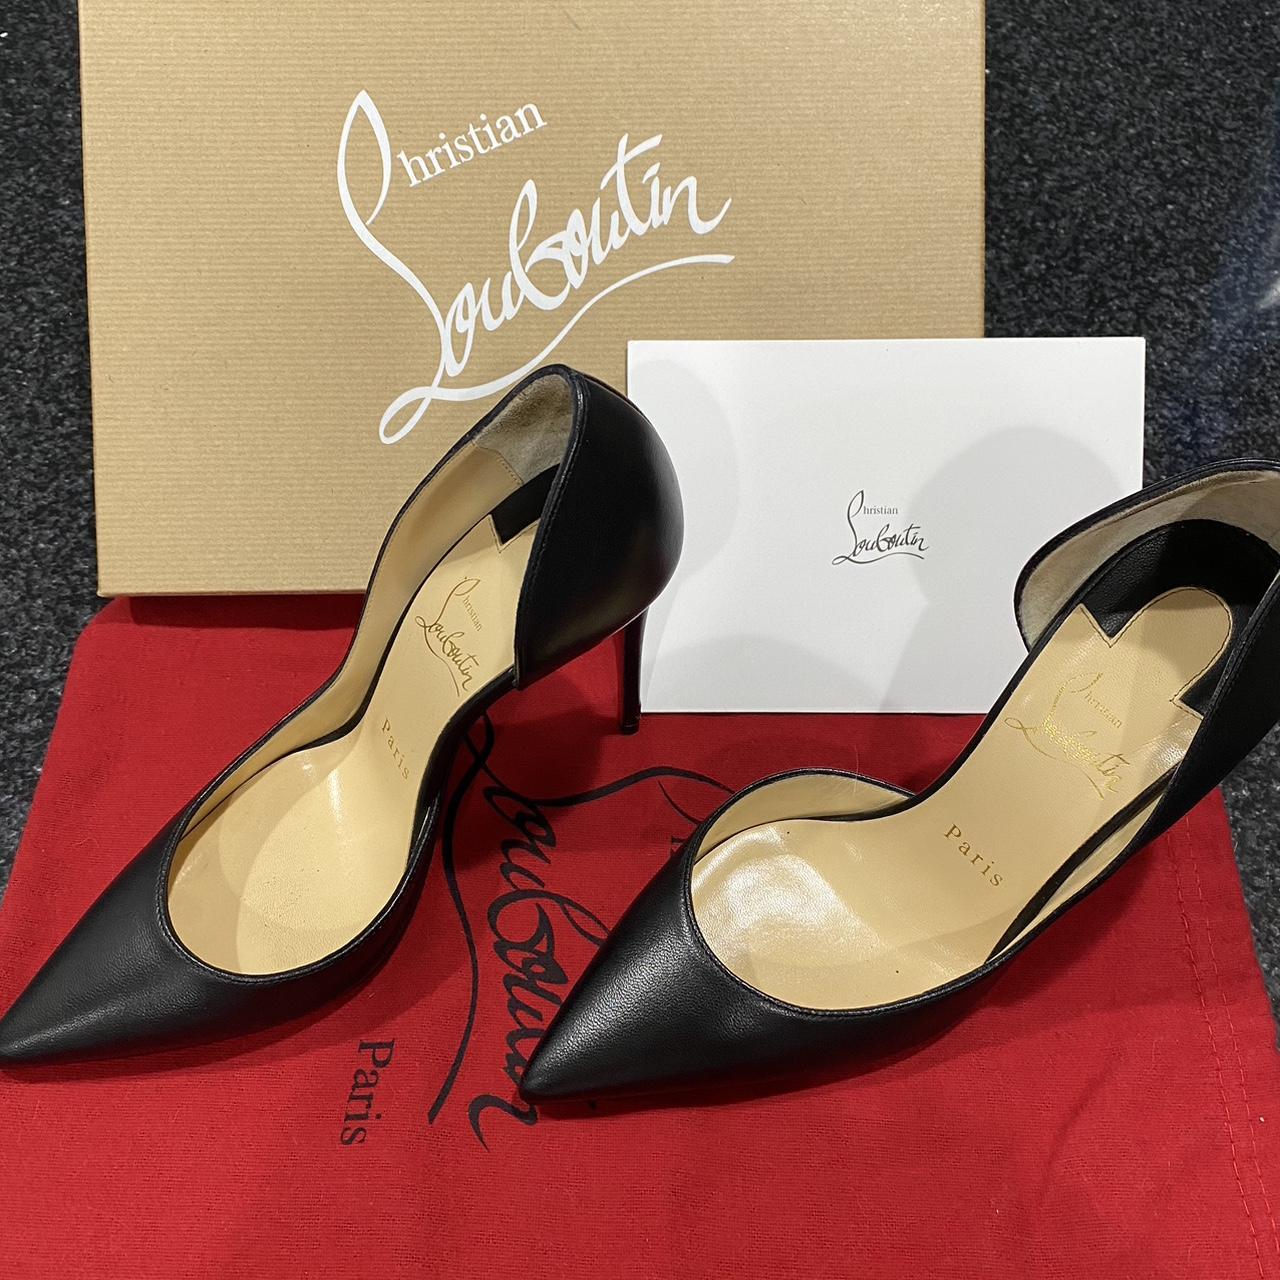 Christian Louboutin Women's Black and Red Courts